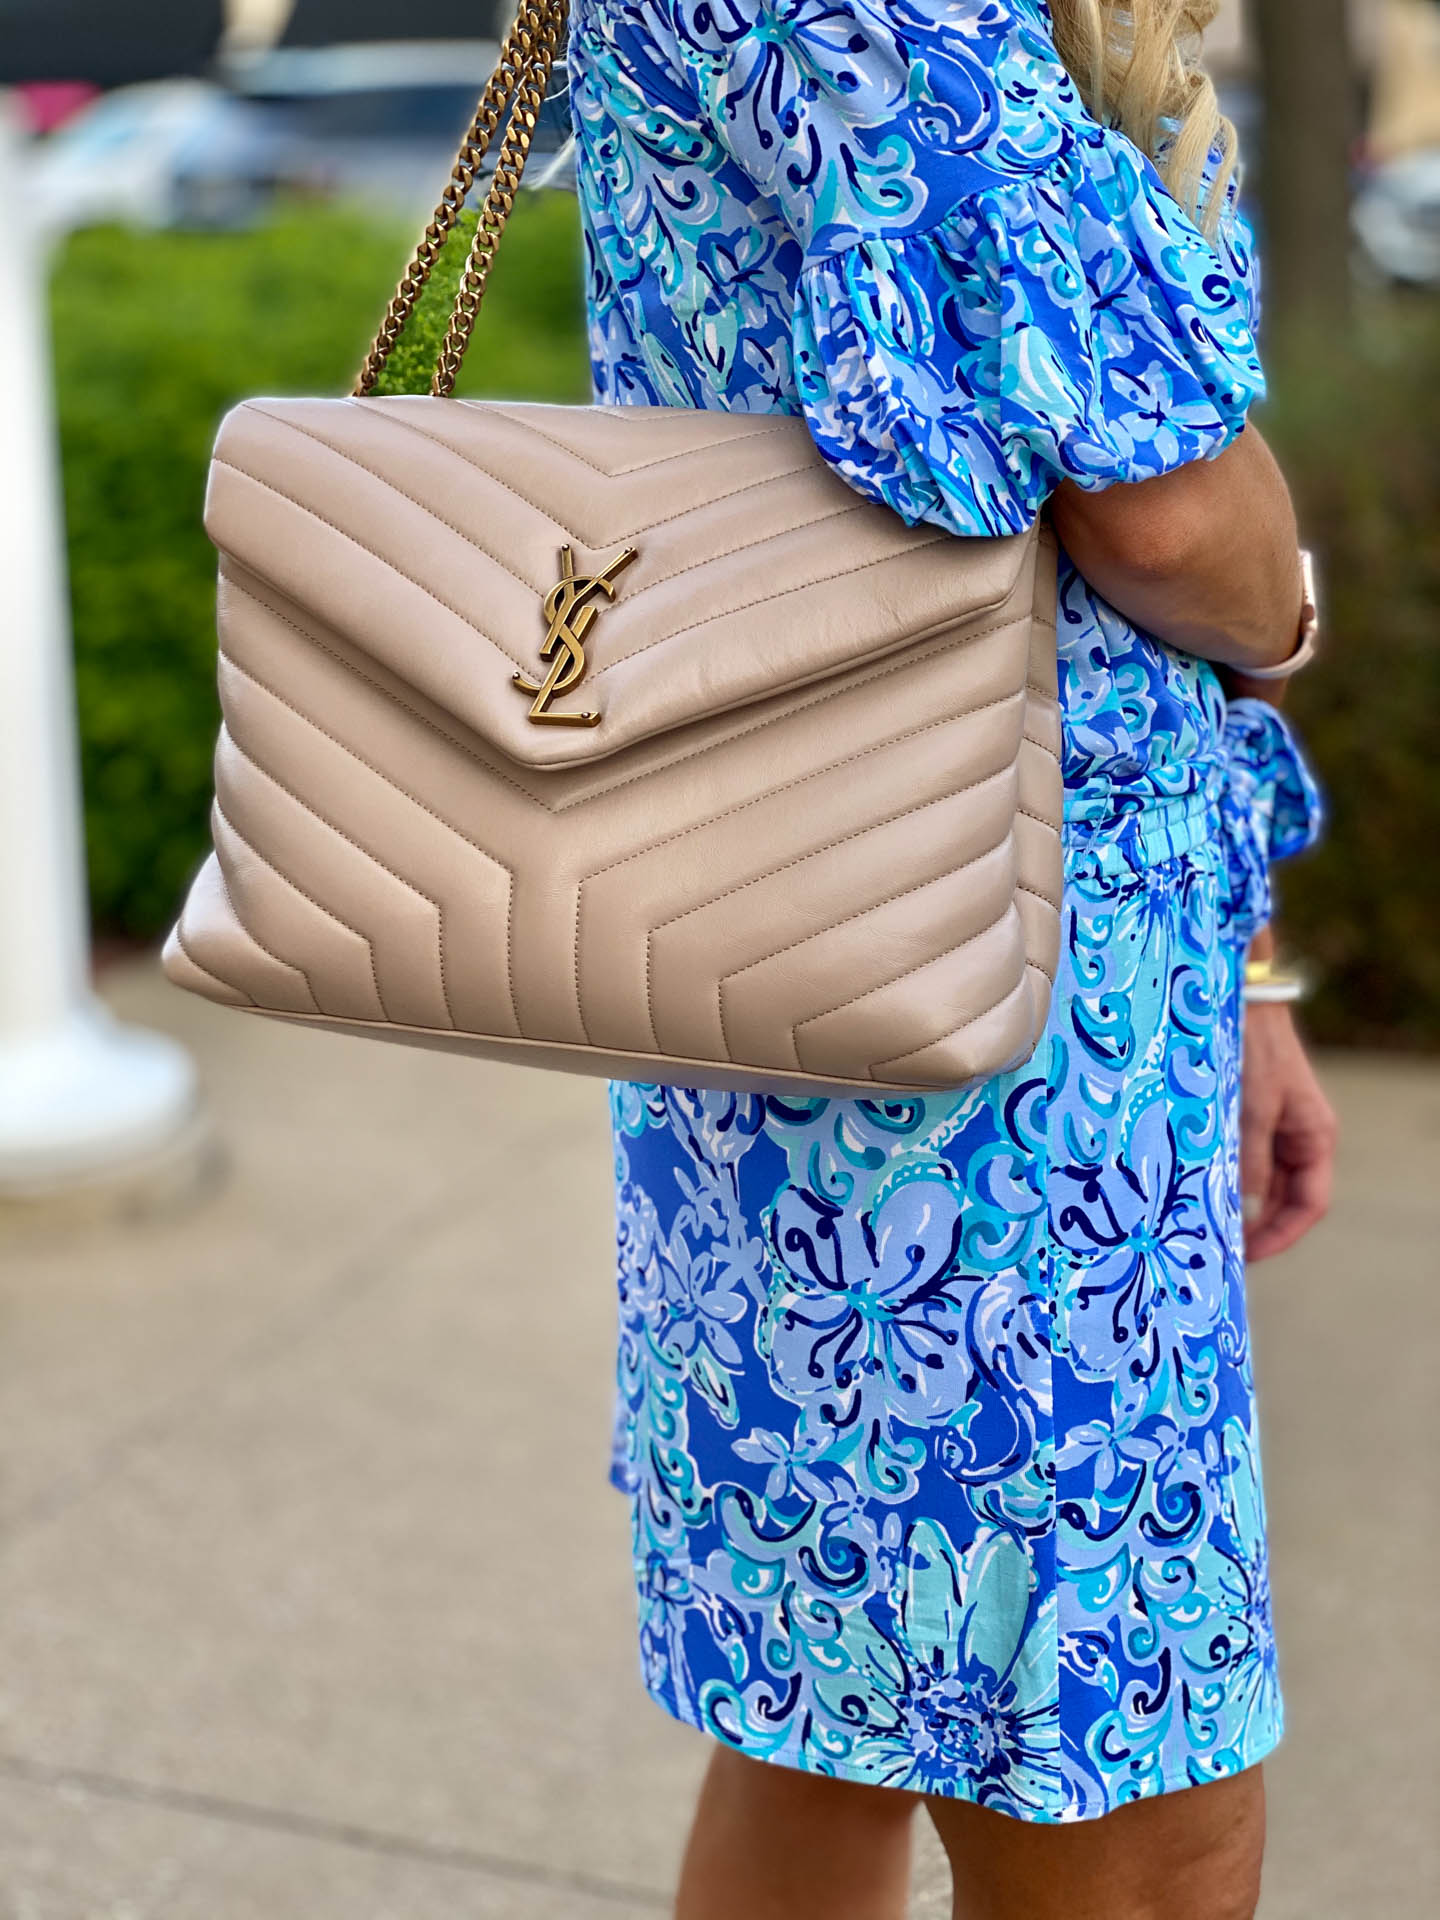 Lilly Pulitzer Romper with Tory Burch Millers, YSL Handbag, and bangles - summer style, endless summer, resort 365